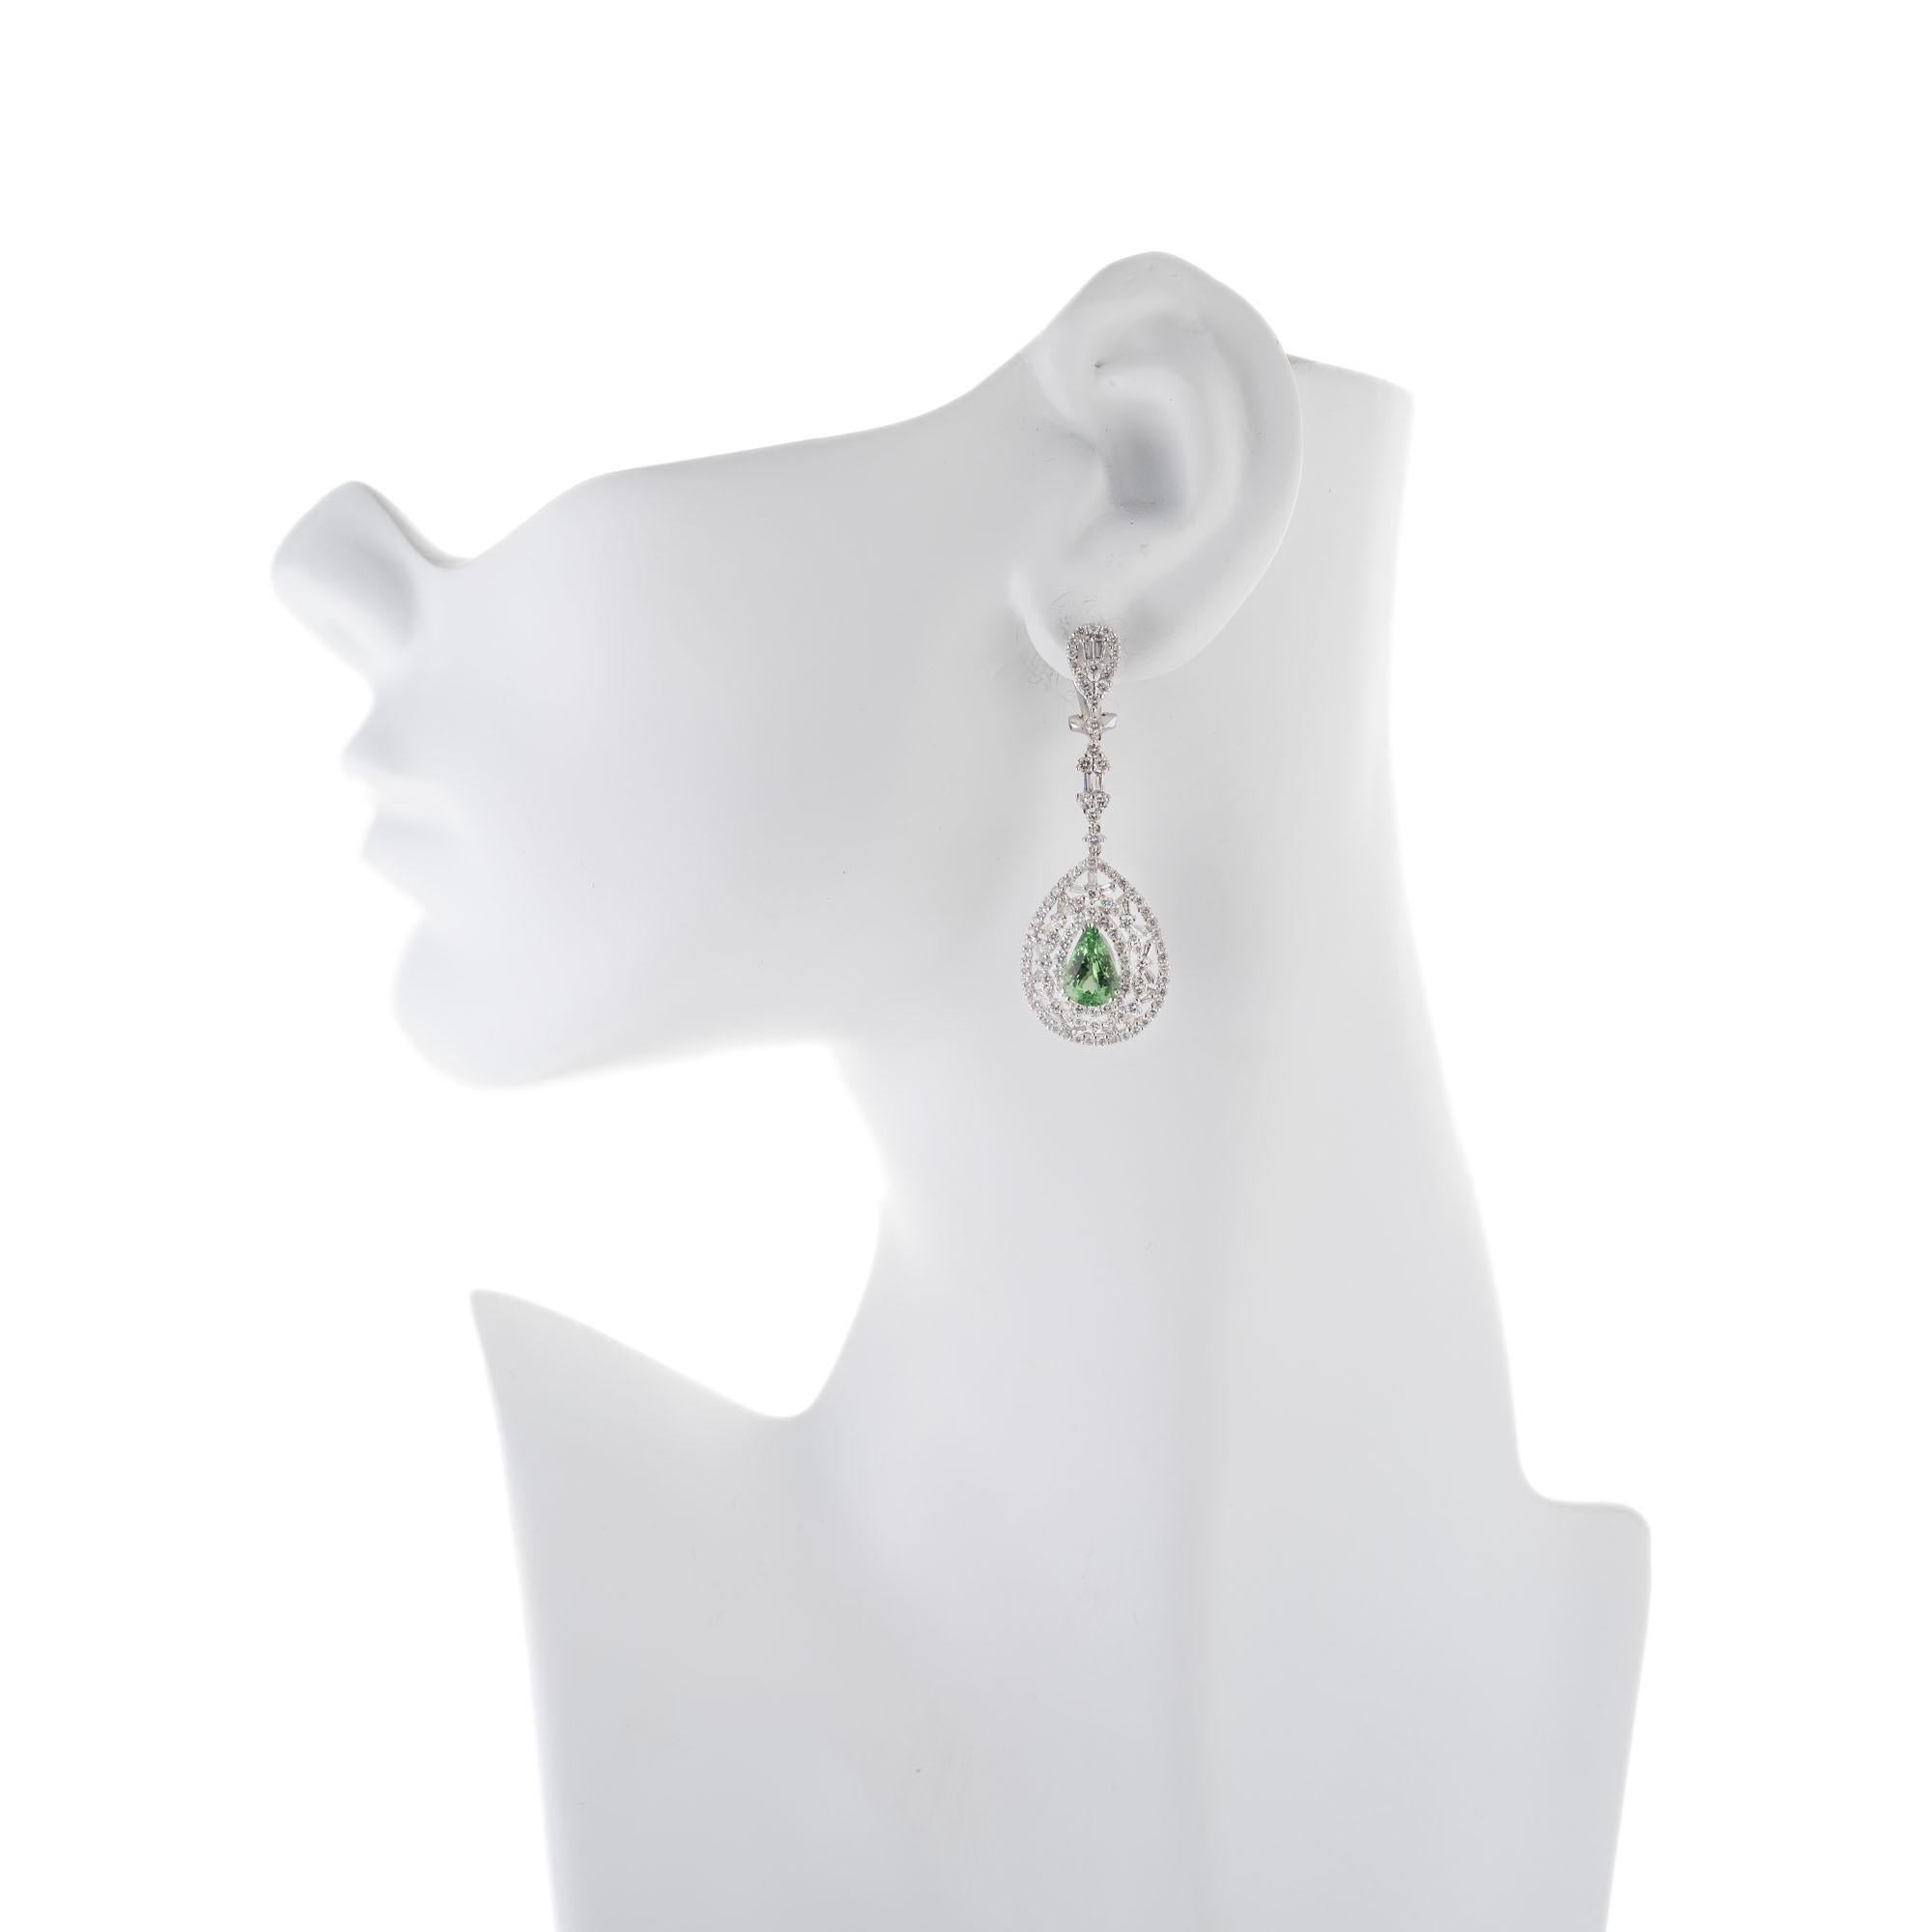 GIA Certified 3.50 Carat Tsavorite Garnet Diamond Gold Dangle Drop Earrings In Excellent Condition For Sale In Stamford, CT